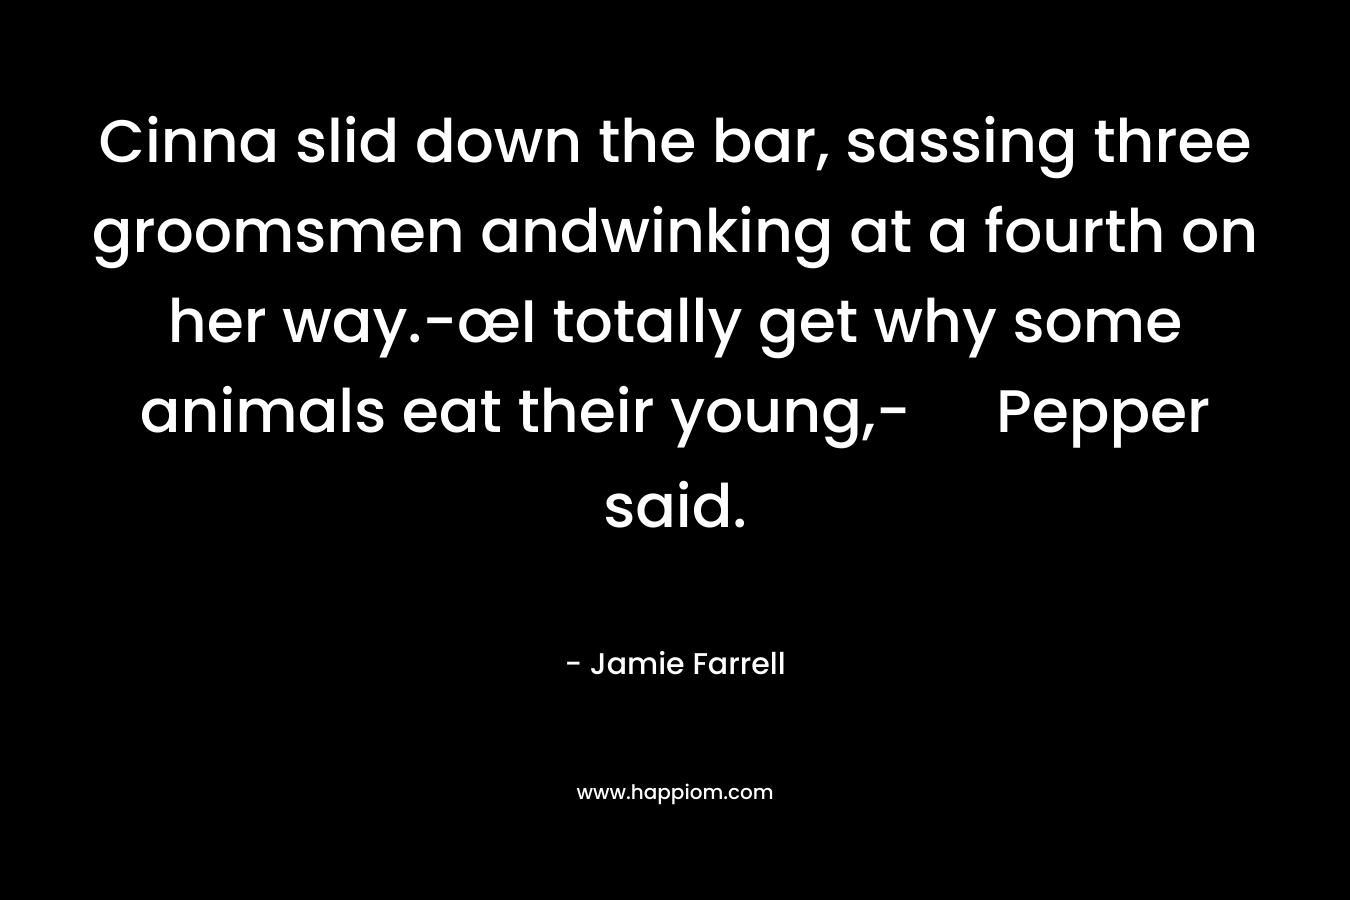 Cinna slid down the bar, sassing three groomsmen andwinking at a fourth on her way.-œI totally get why some animals eat their young,- Pepper said.